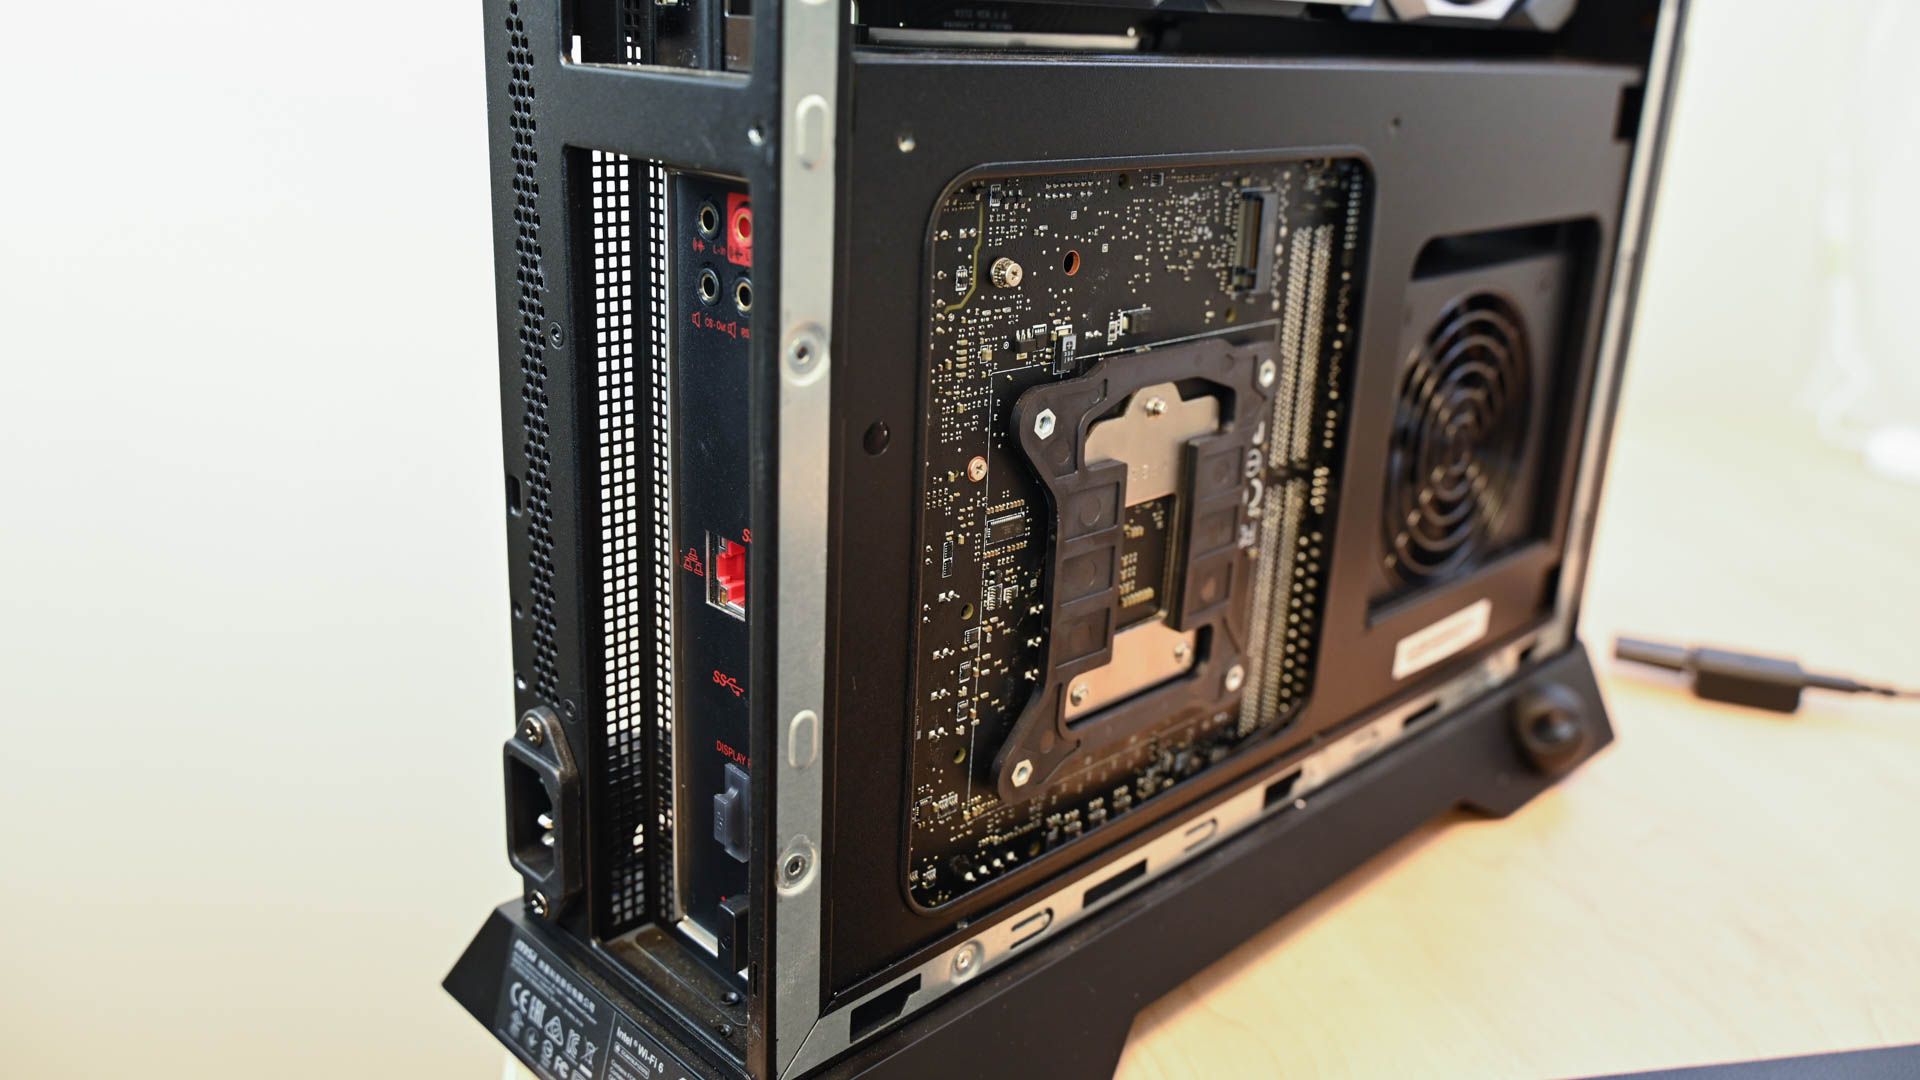 The motherboard in the MSI Trident